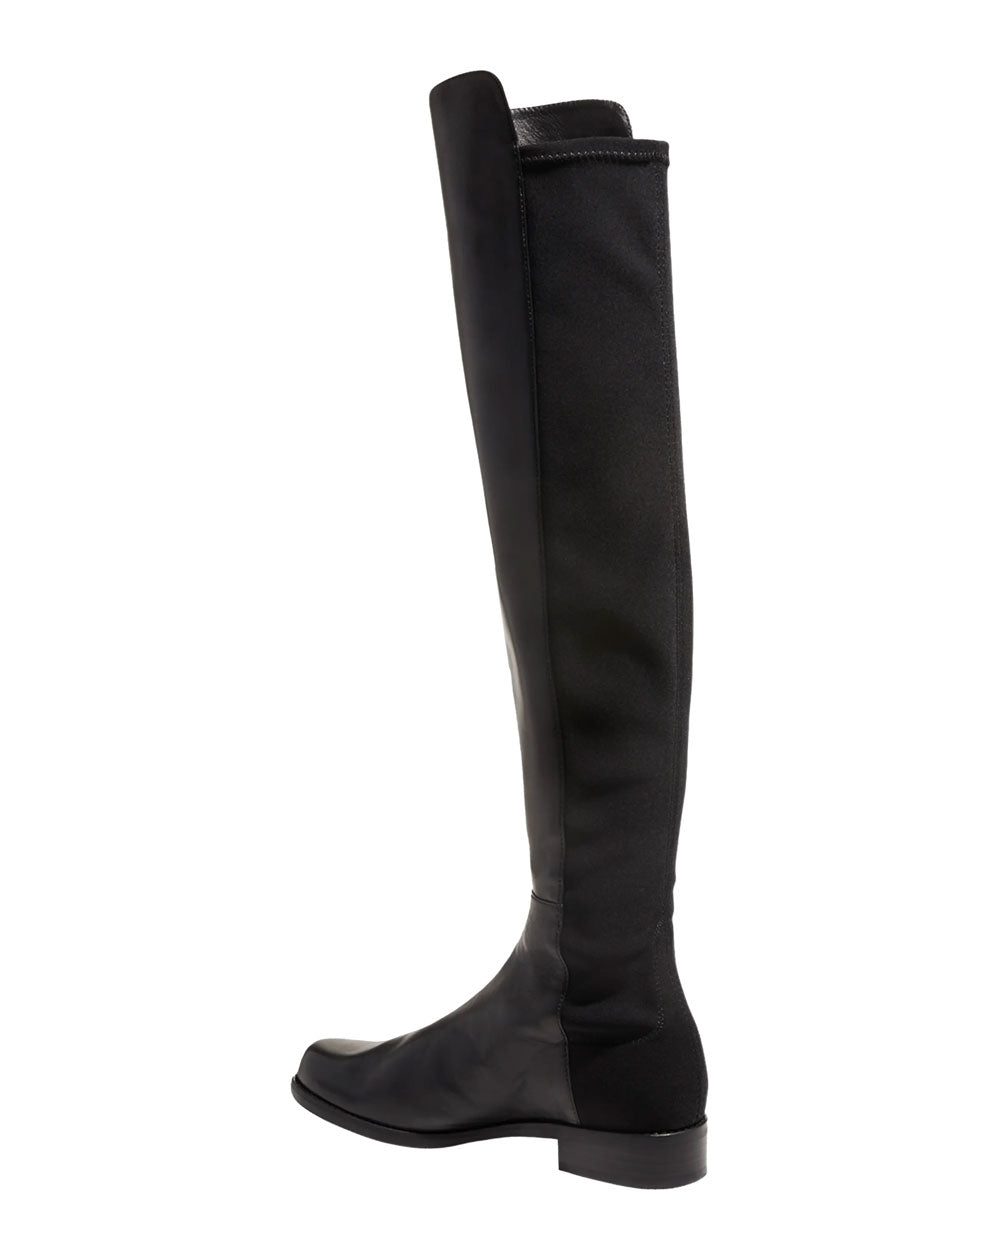 5050 Leather Over-the-Knee Boot in Black